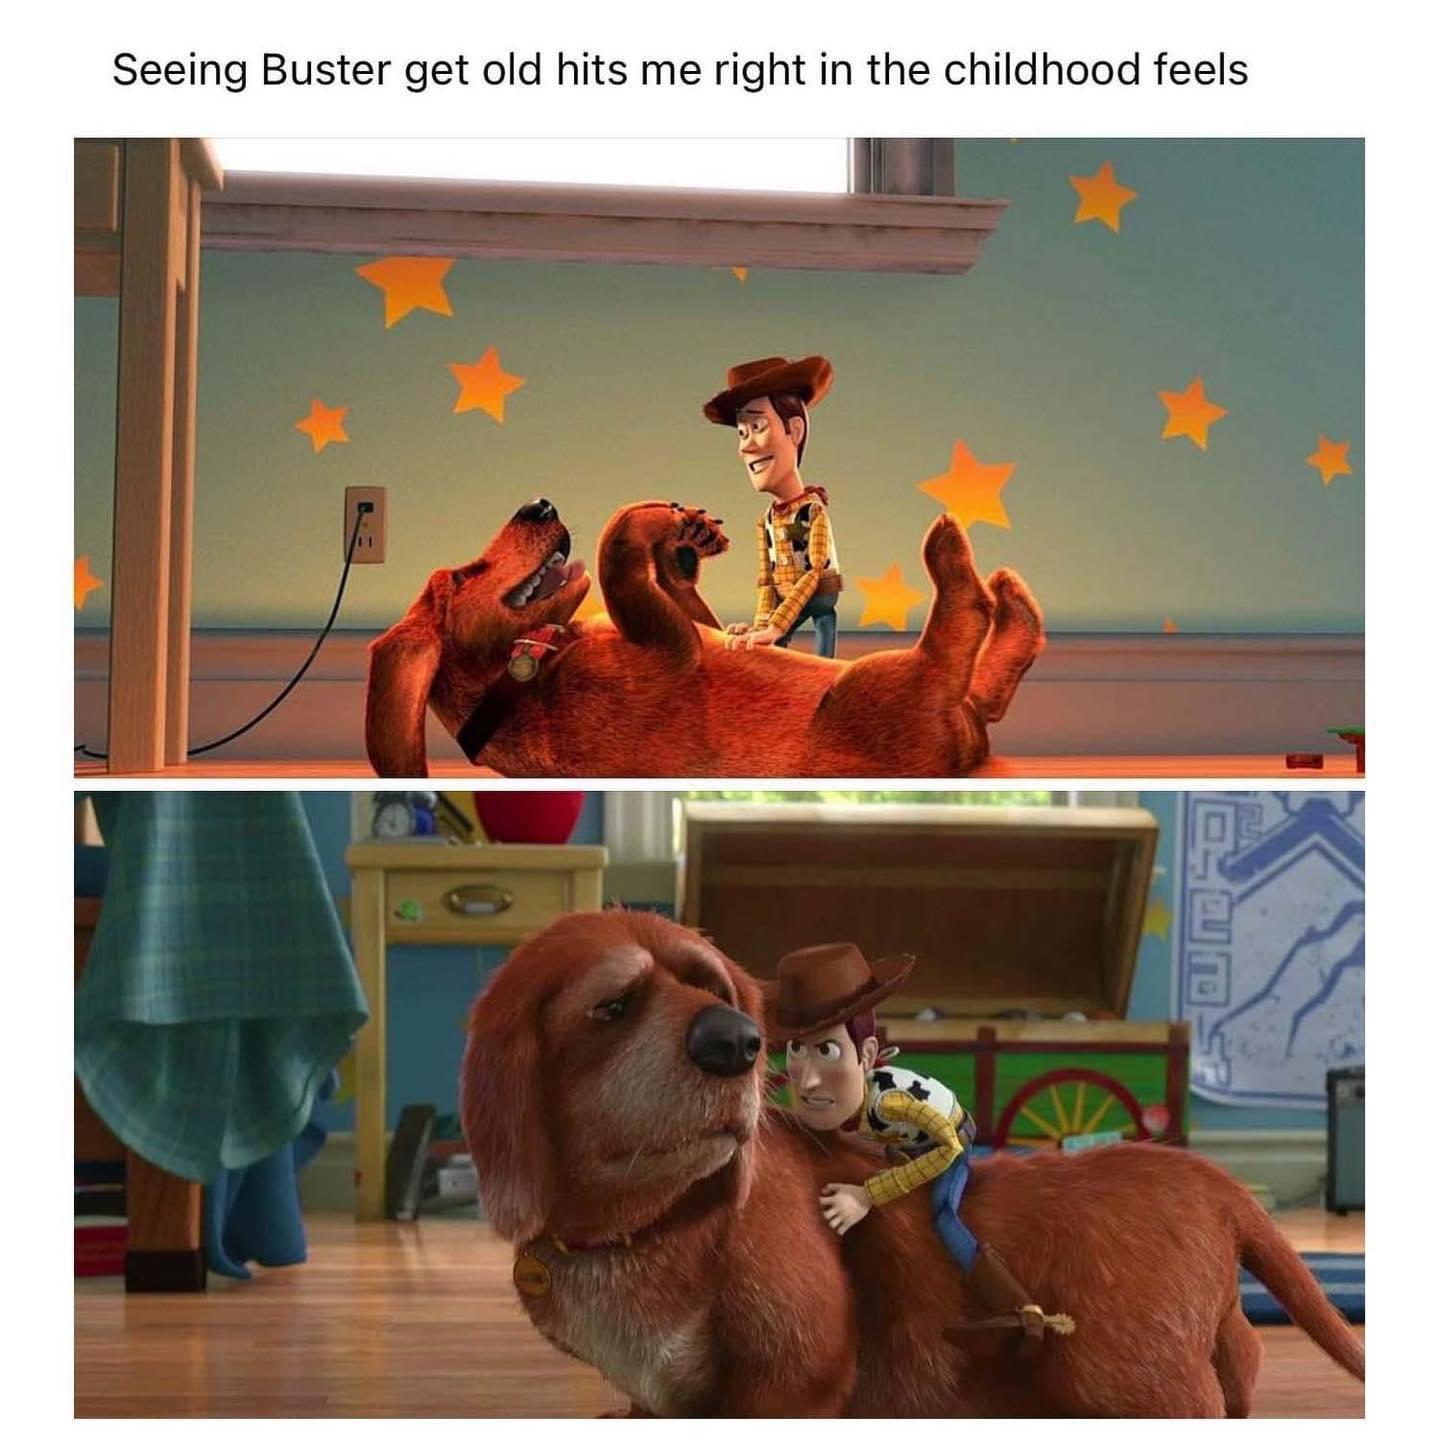 monday morning randomness - buster from toy story 3 - Seeing Buster get old hits me right in the childhood feels Ser